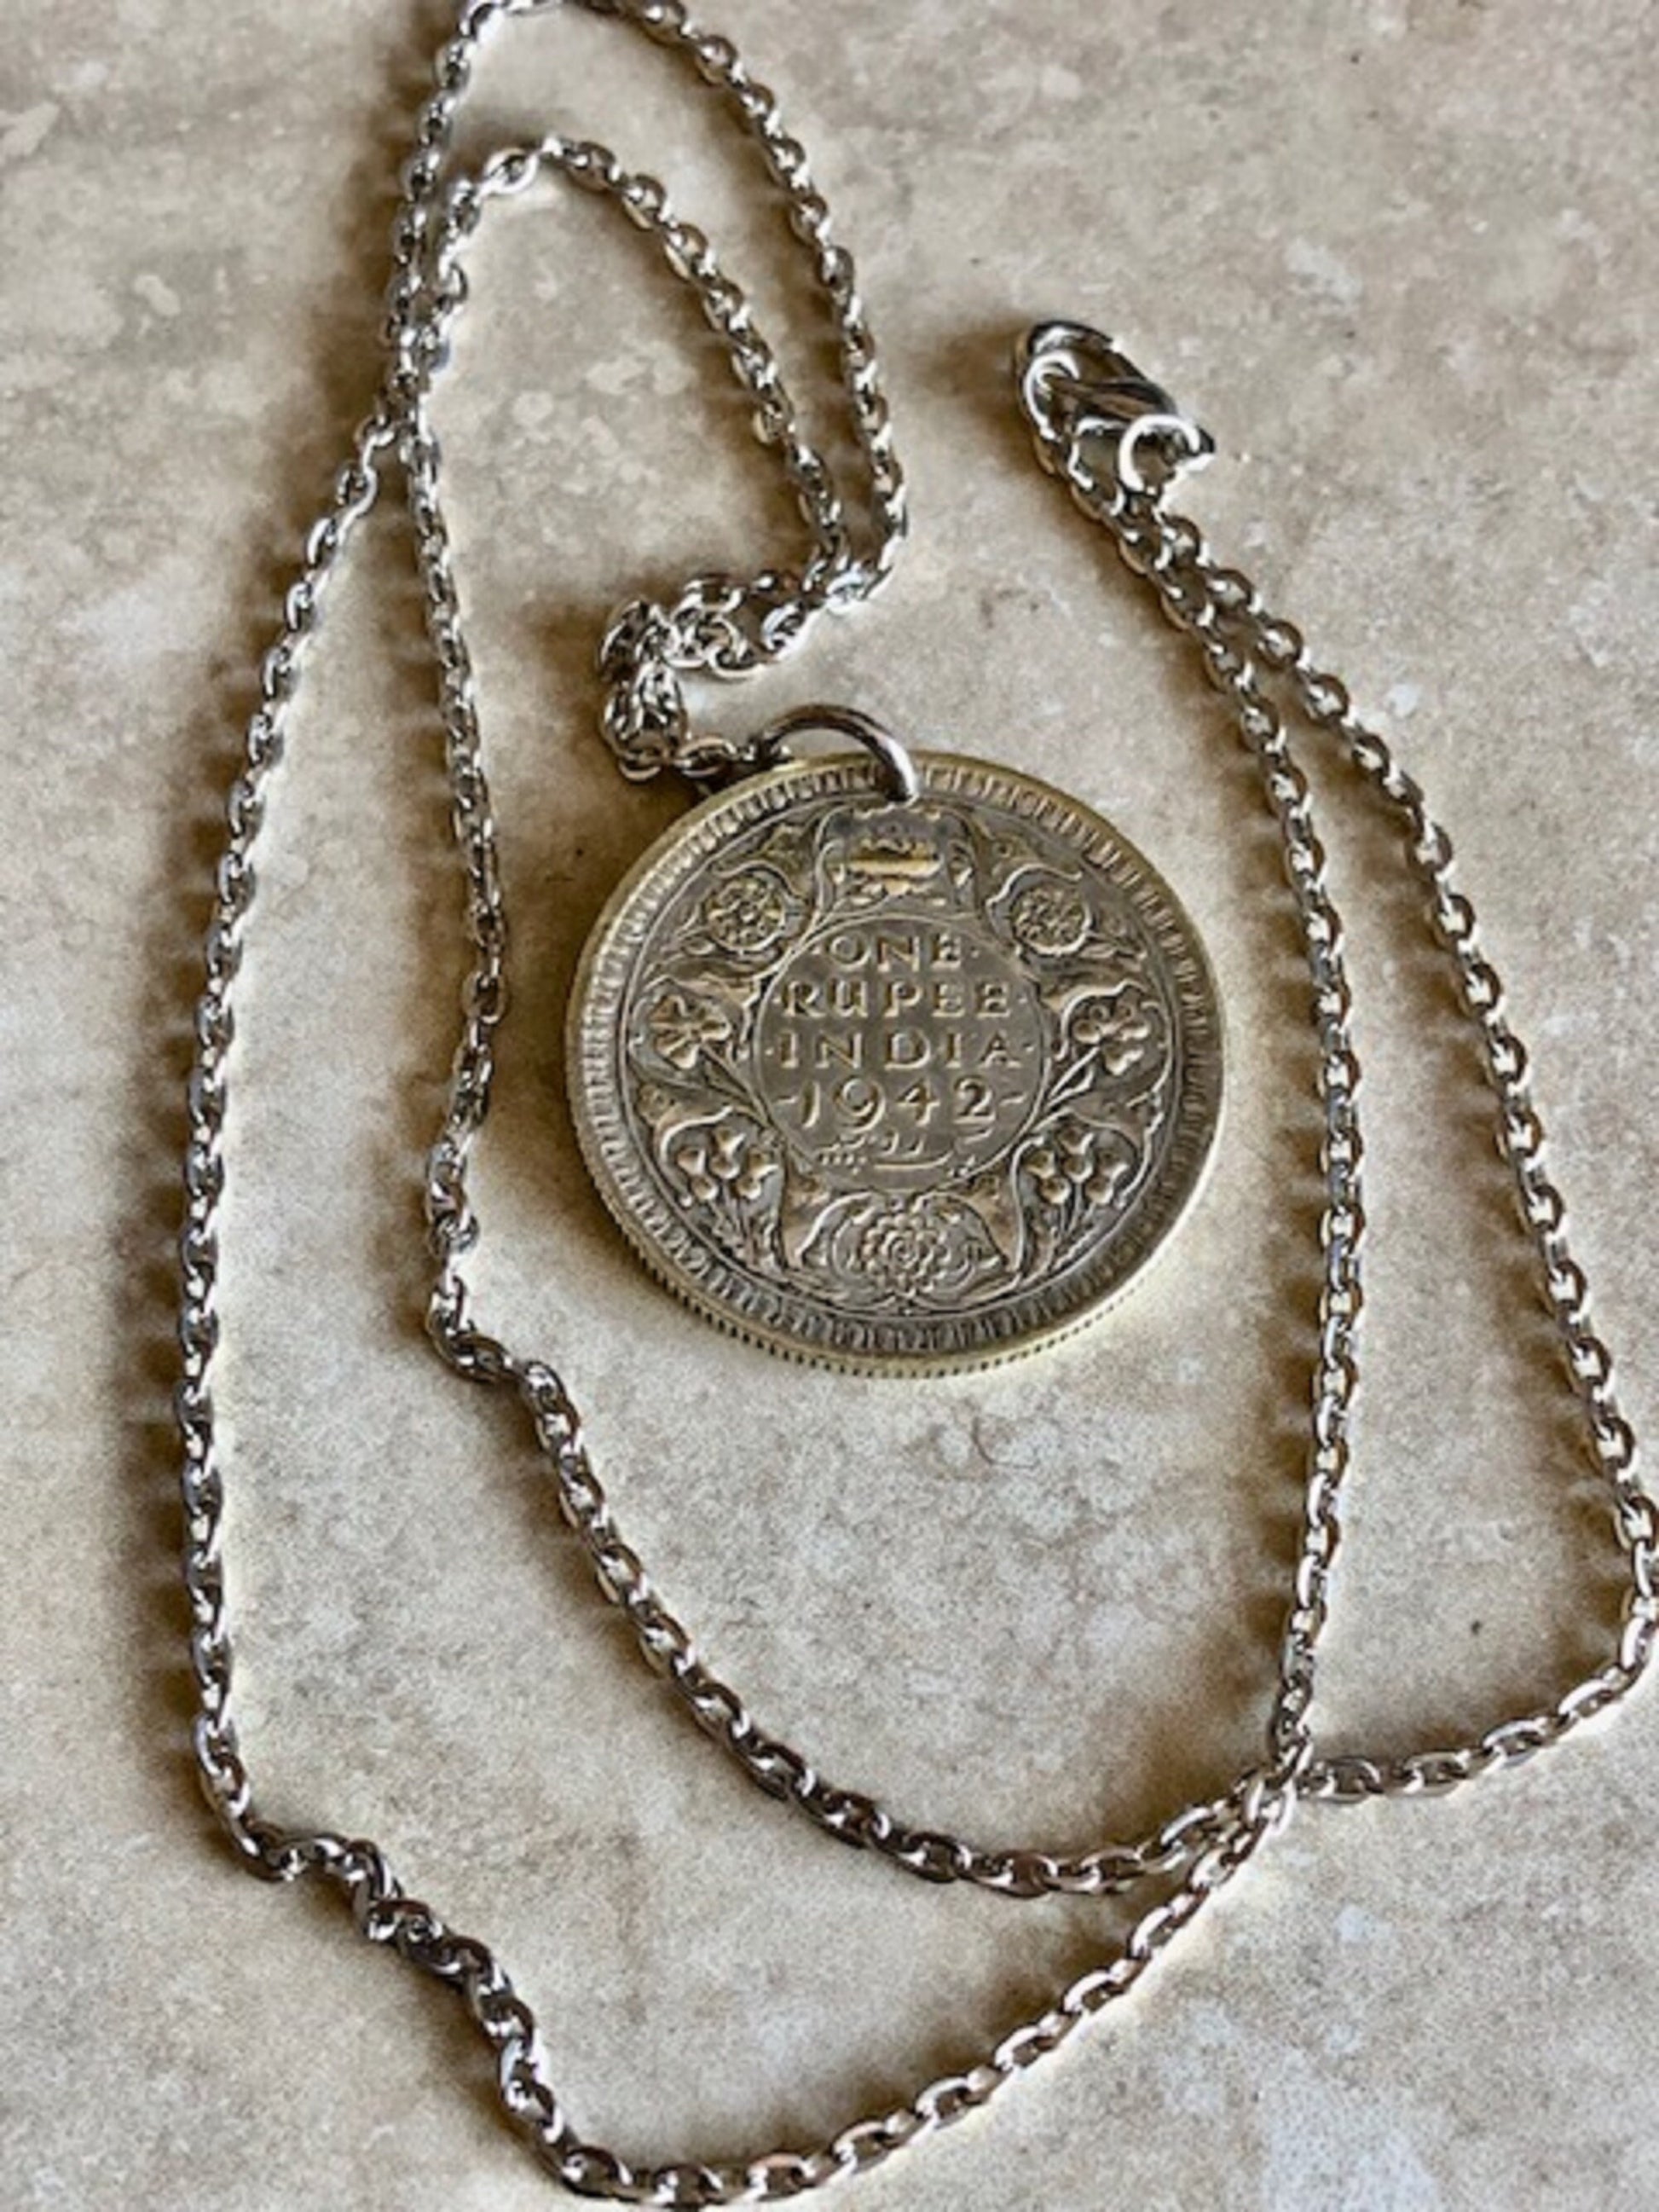 India Coin Pendant East India Replica 1 Rupee 1942 Personal Vintage Handmade Jewelry Gift Friend Charm For Him Her World Coin Collector